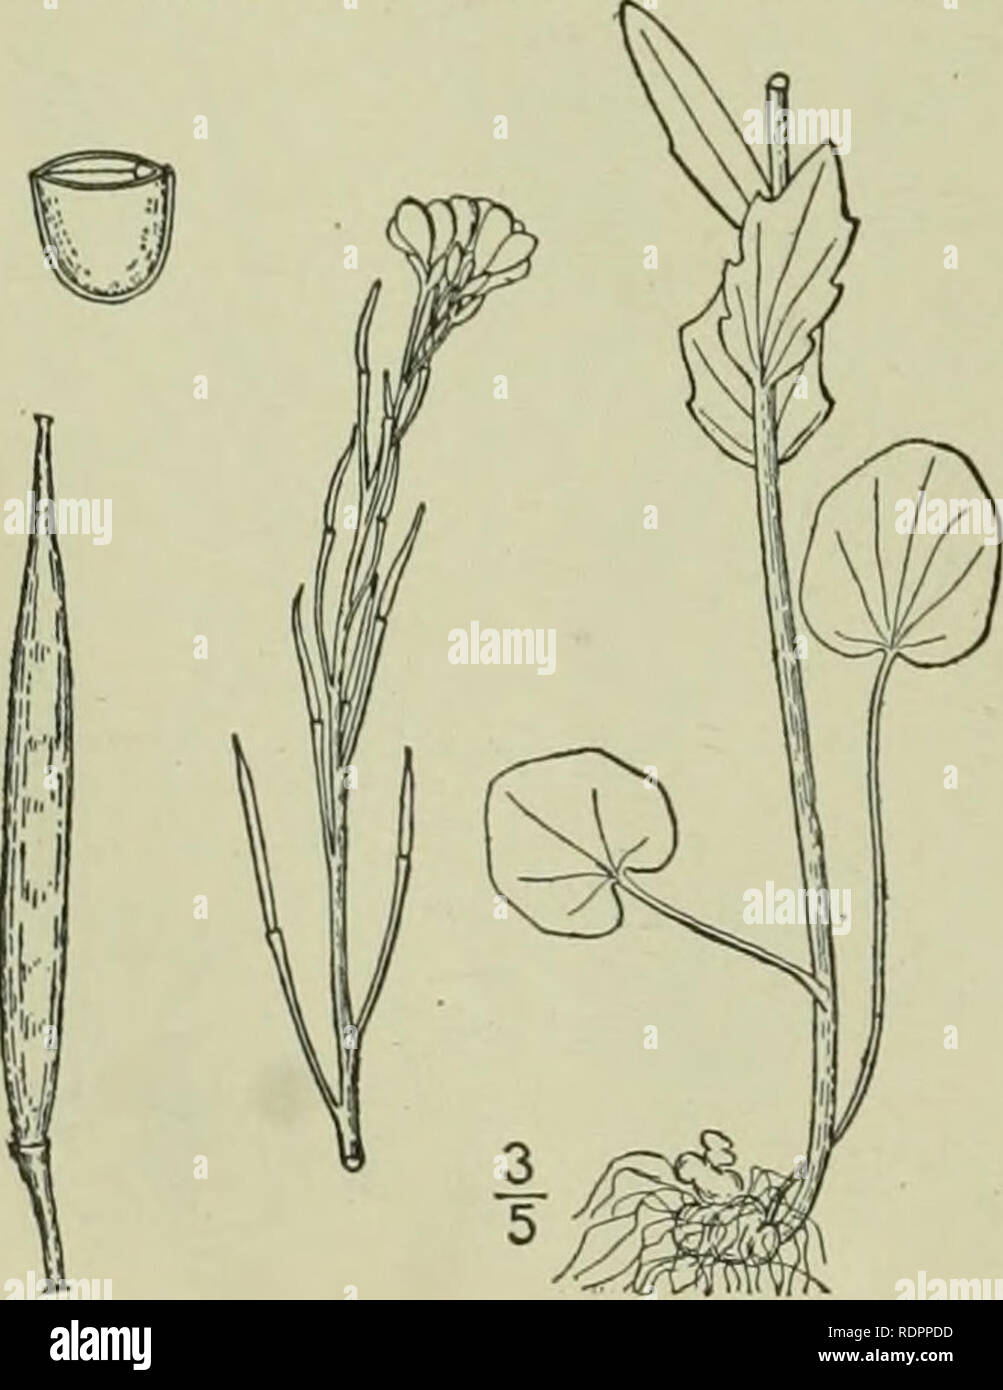 . An illustrated flora of the northern United States, Canada and the British possessions : from Newfoundland to the parallel of the southern boundary of Virginia and from the Atlantic Ocean westward to the 102nd meridian. Botany. CRUCIFERAE. 7. Cardamine bellidifolia L. Alpine Cress. Fig. 2089. Cardamine bellidifolia L. Sp. PI. 654. 1753. Perennial, tufted, glabrous, 2-5' high, with fibrous roots. Lower leaves long-petioled, .ovate, obtuse, the blades 4&quot;-8&quot; long, 3&quot;-4&quot; broad, abruptly contracted into the petiole, entire, or with a few rounded teeth; upper leaves similar, sh Stock Photo